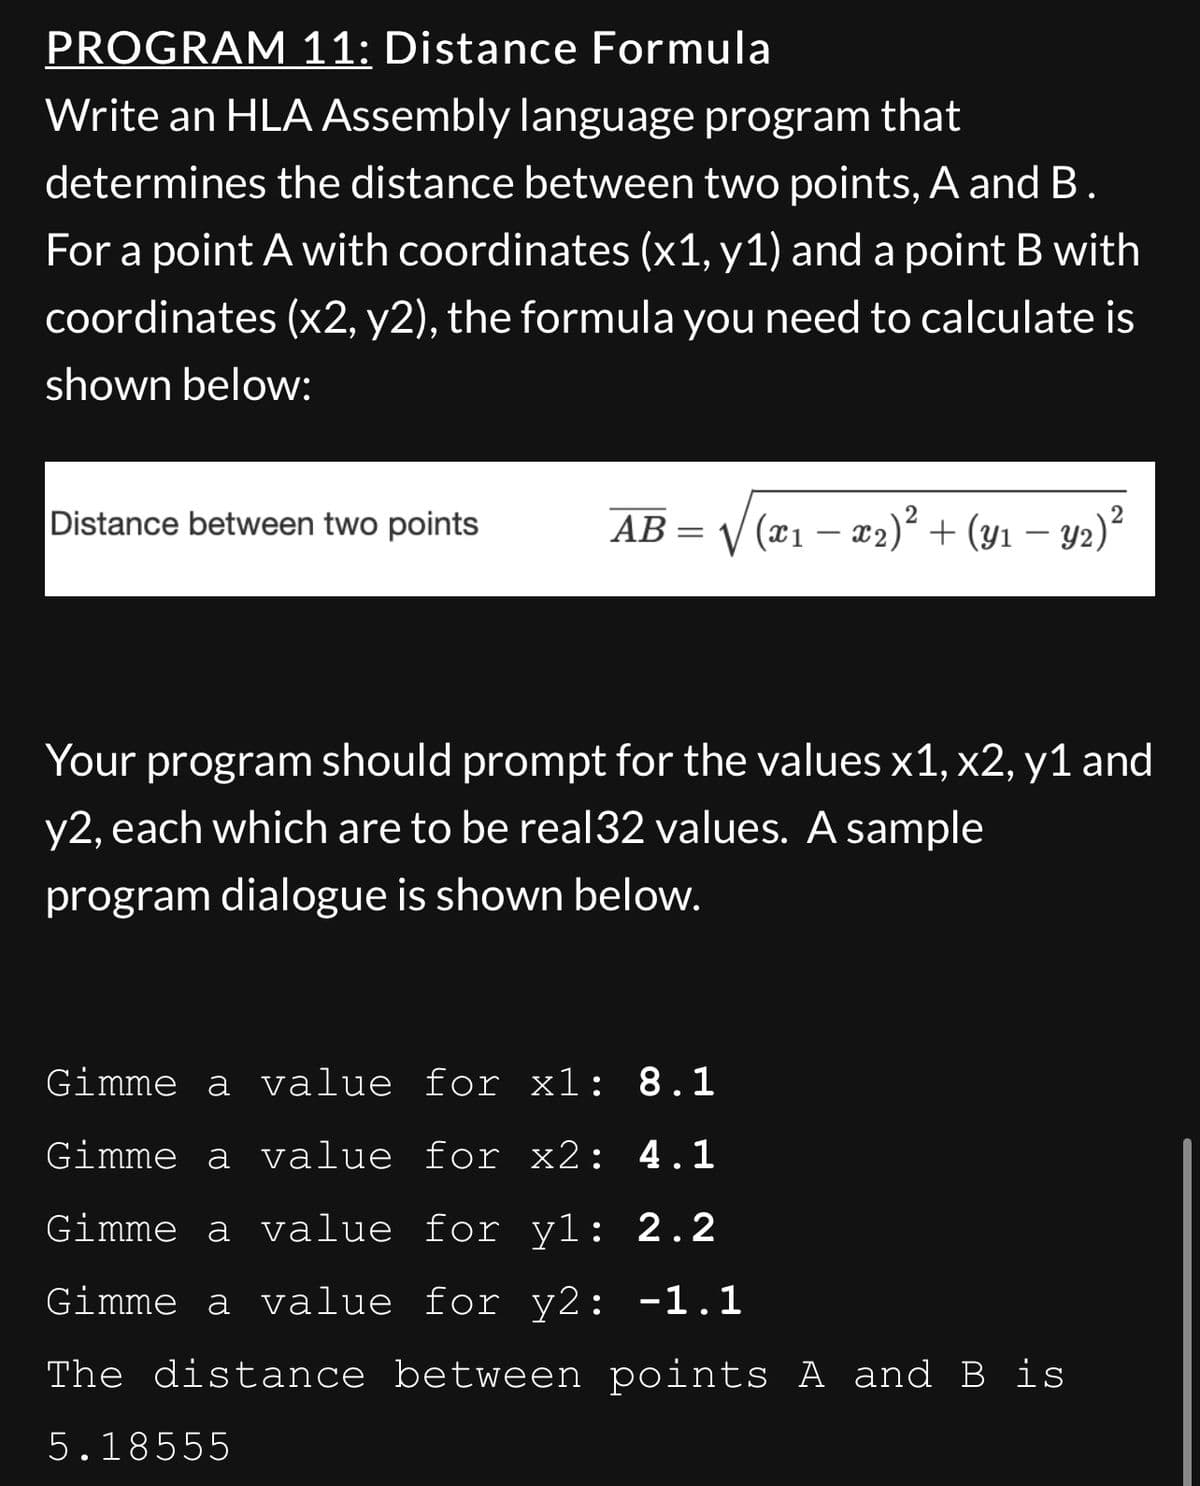 PROGRAM 11: Distance Formula
Write an HLA Assembly language program that
determines the distance between two points, A and B.
For a point A with coordinates (x1, y1) and a point B with
coordinates (x2, y2), the formula you need to calculate is
shown below:
Distance between two points
AB
=
5.18555
√(x₁ − x2)² + (y₁ − Y2) ²
Your program should prompt for the values x1, x2, y1 and
y2, each which are to be real32 values. A sample
program dialogue is shown below.
Gimme a value for x1: 8.1
Gimme a value for x2: 4.1
Gimme a value for yl: 2.2
Gimme a value for y2: -1.1
The distance between points A and B is